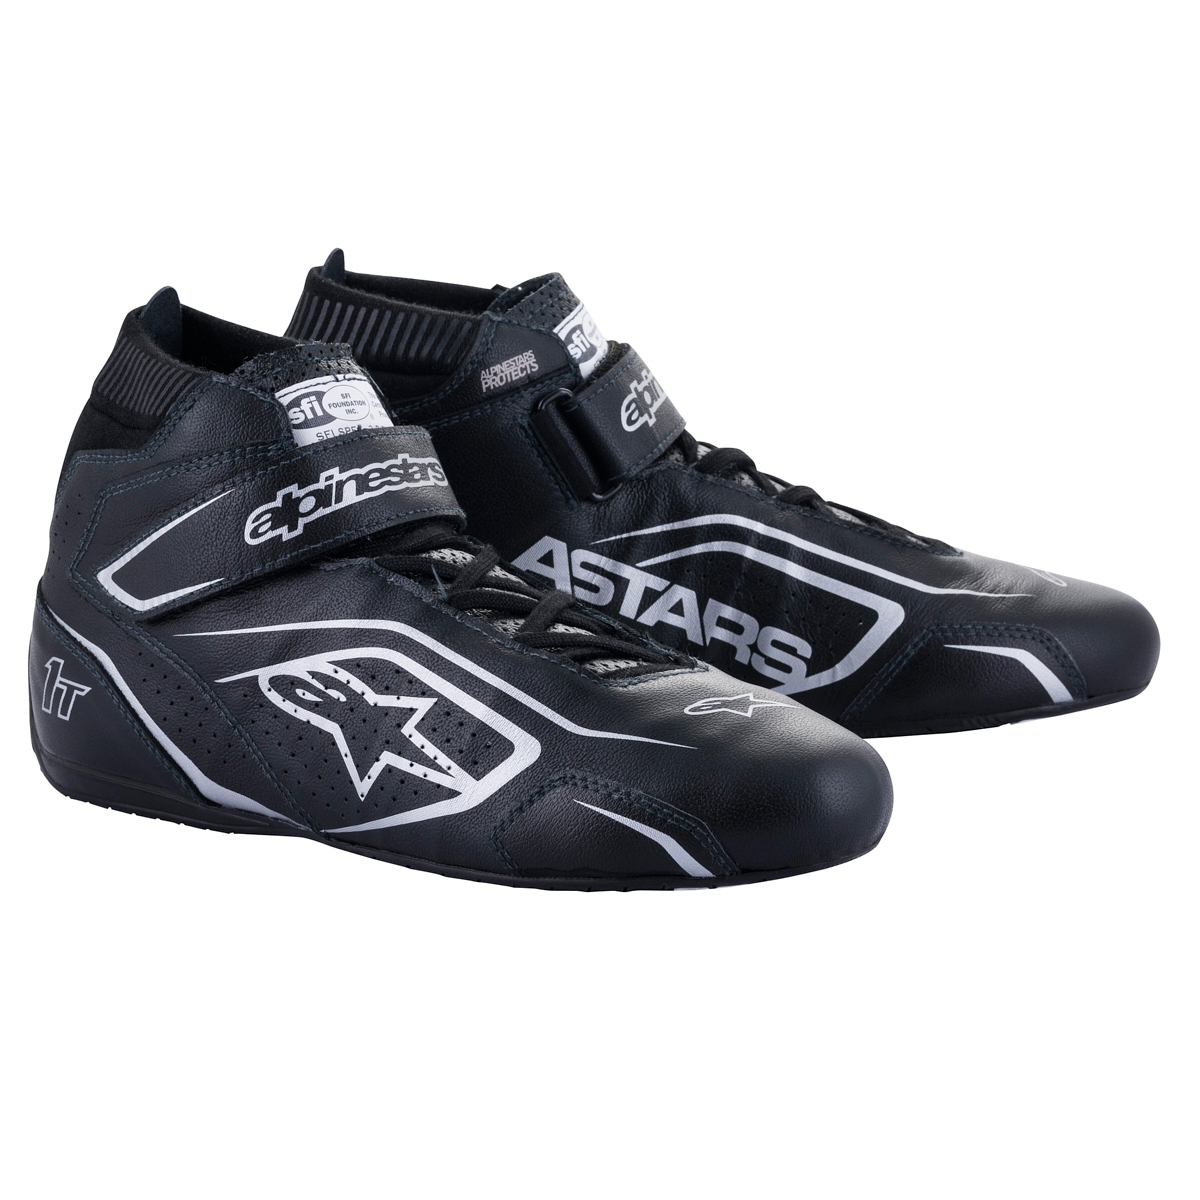 Alpinestars 2710122-119-8.5 Driving Shoe, Tech 1-T V3, Mid-Top, SFI 3.3, Leather Outer, Nomex Inner, Black / Silver, Size 8.5, Pair